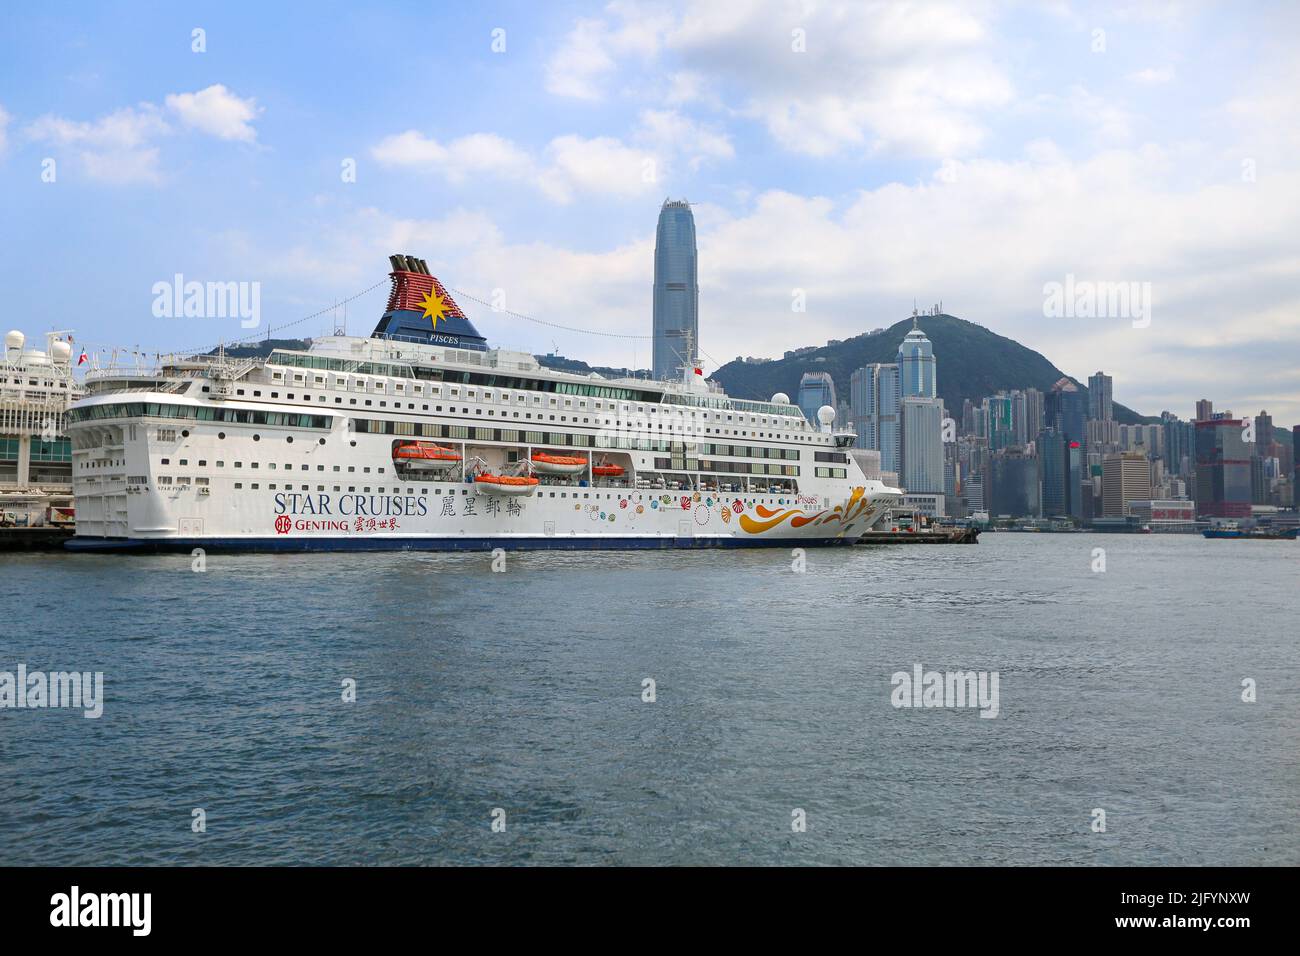 The cruise ship Star Pisces (Star cruises) - Genting Hong Kong - In 2022, the ship was sold for scrap in Alang, India. Stock Photo